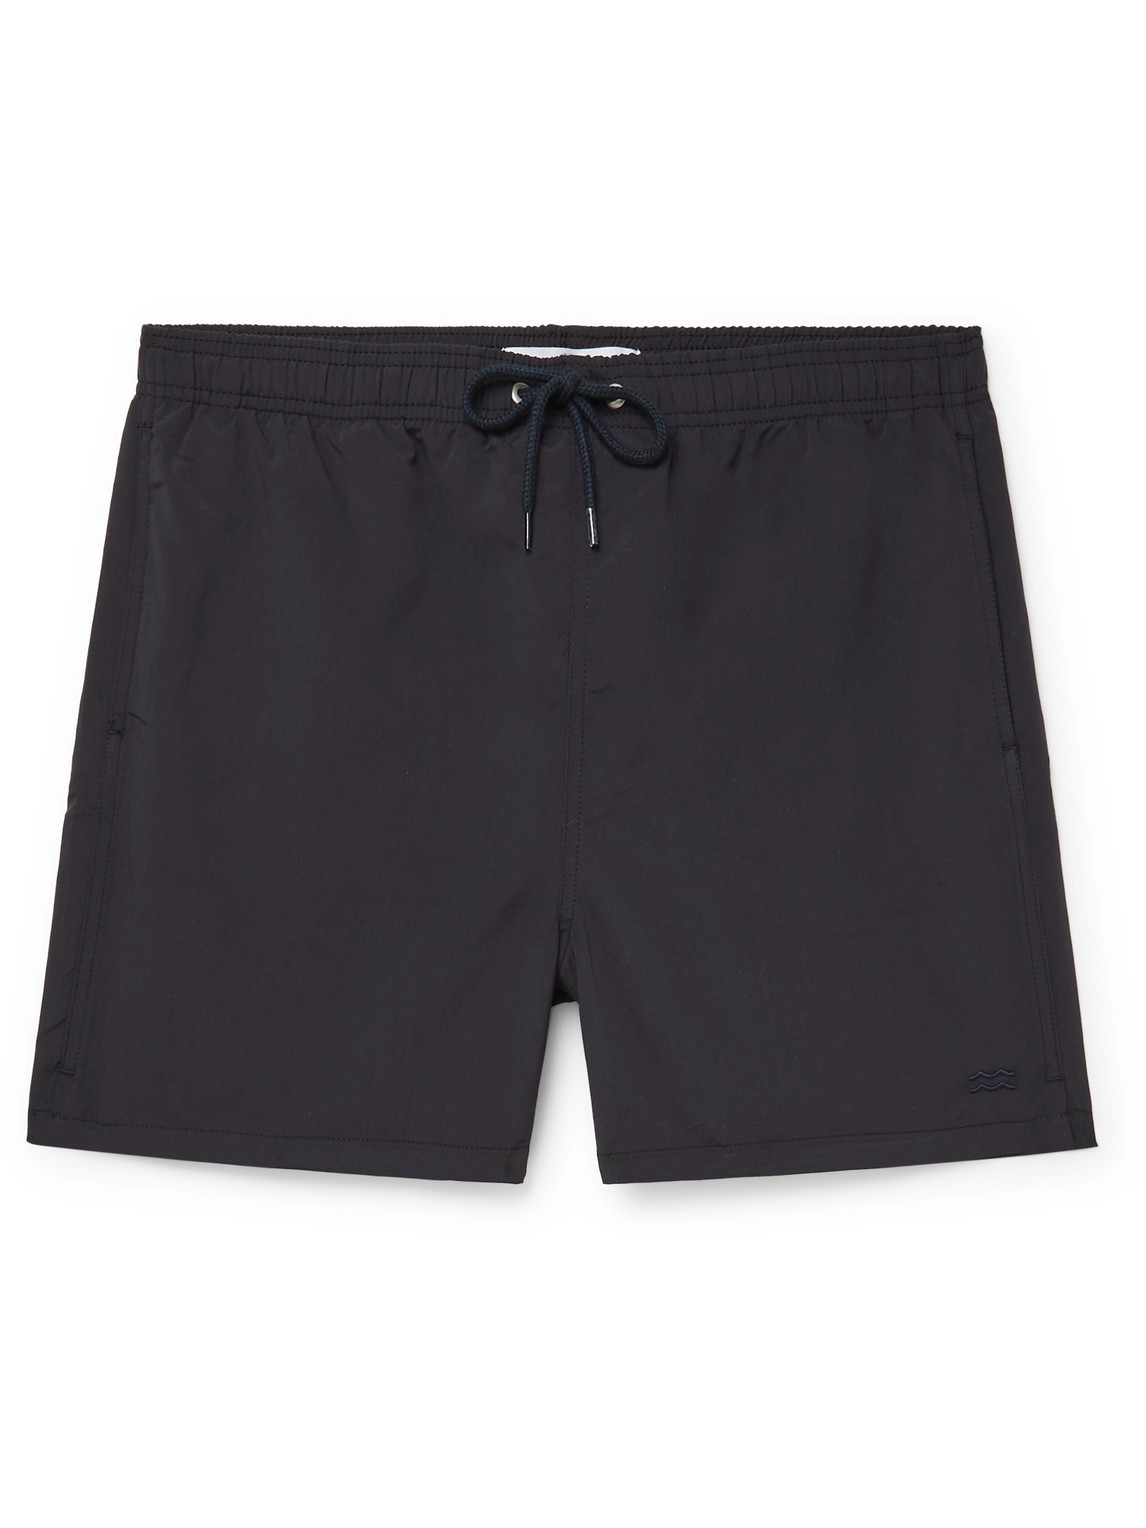 NORSE PROJECTS HAUGE MID-LENGTH SWIM SHORTS